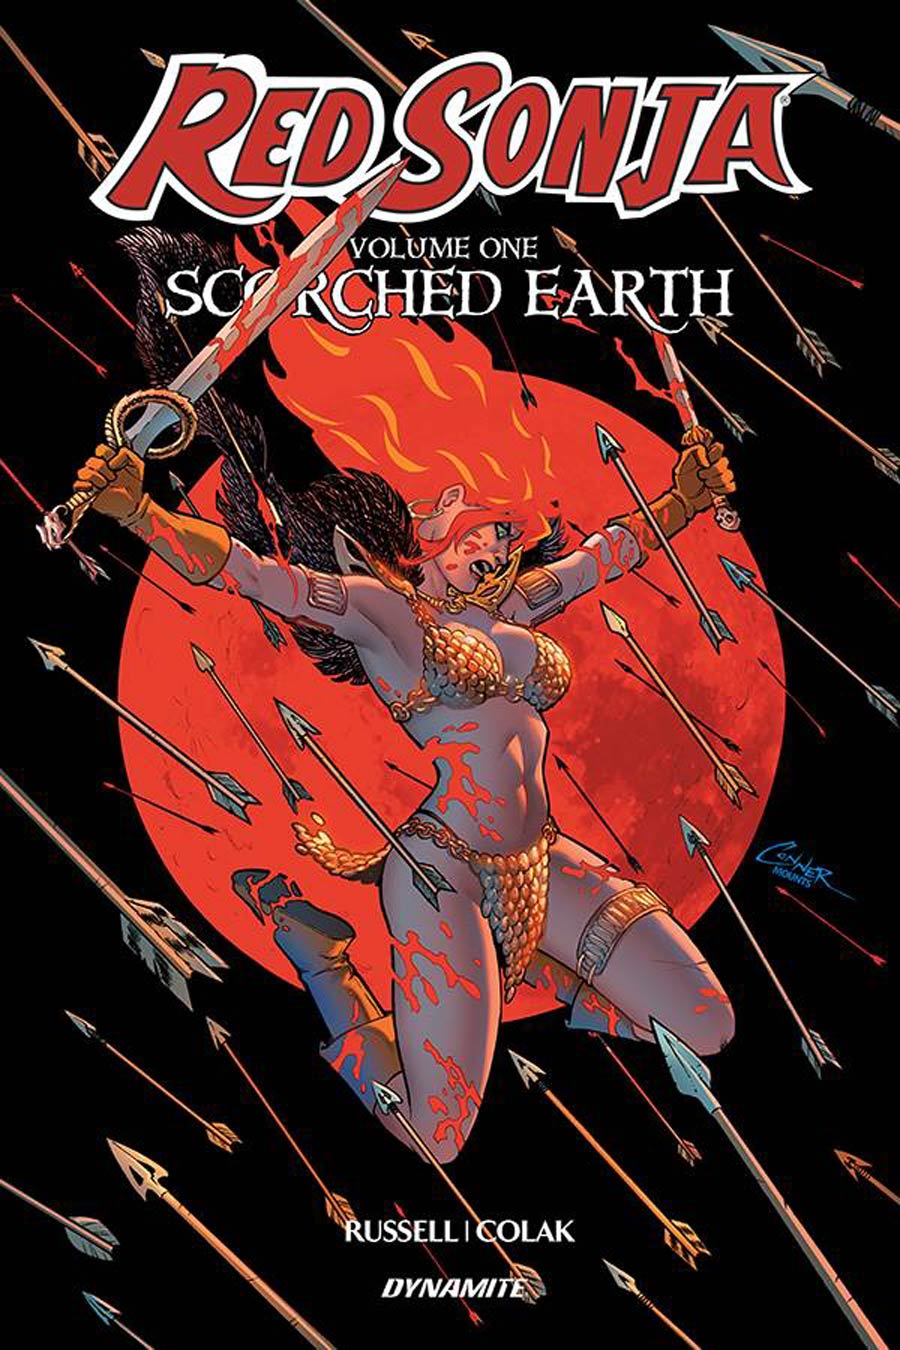 Red Sonja (2019) Vol 1 Scorched Earth TP